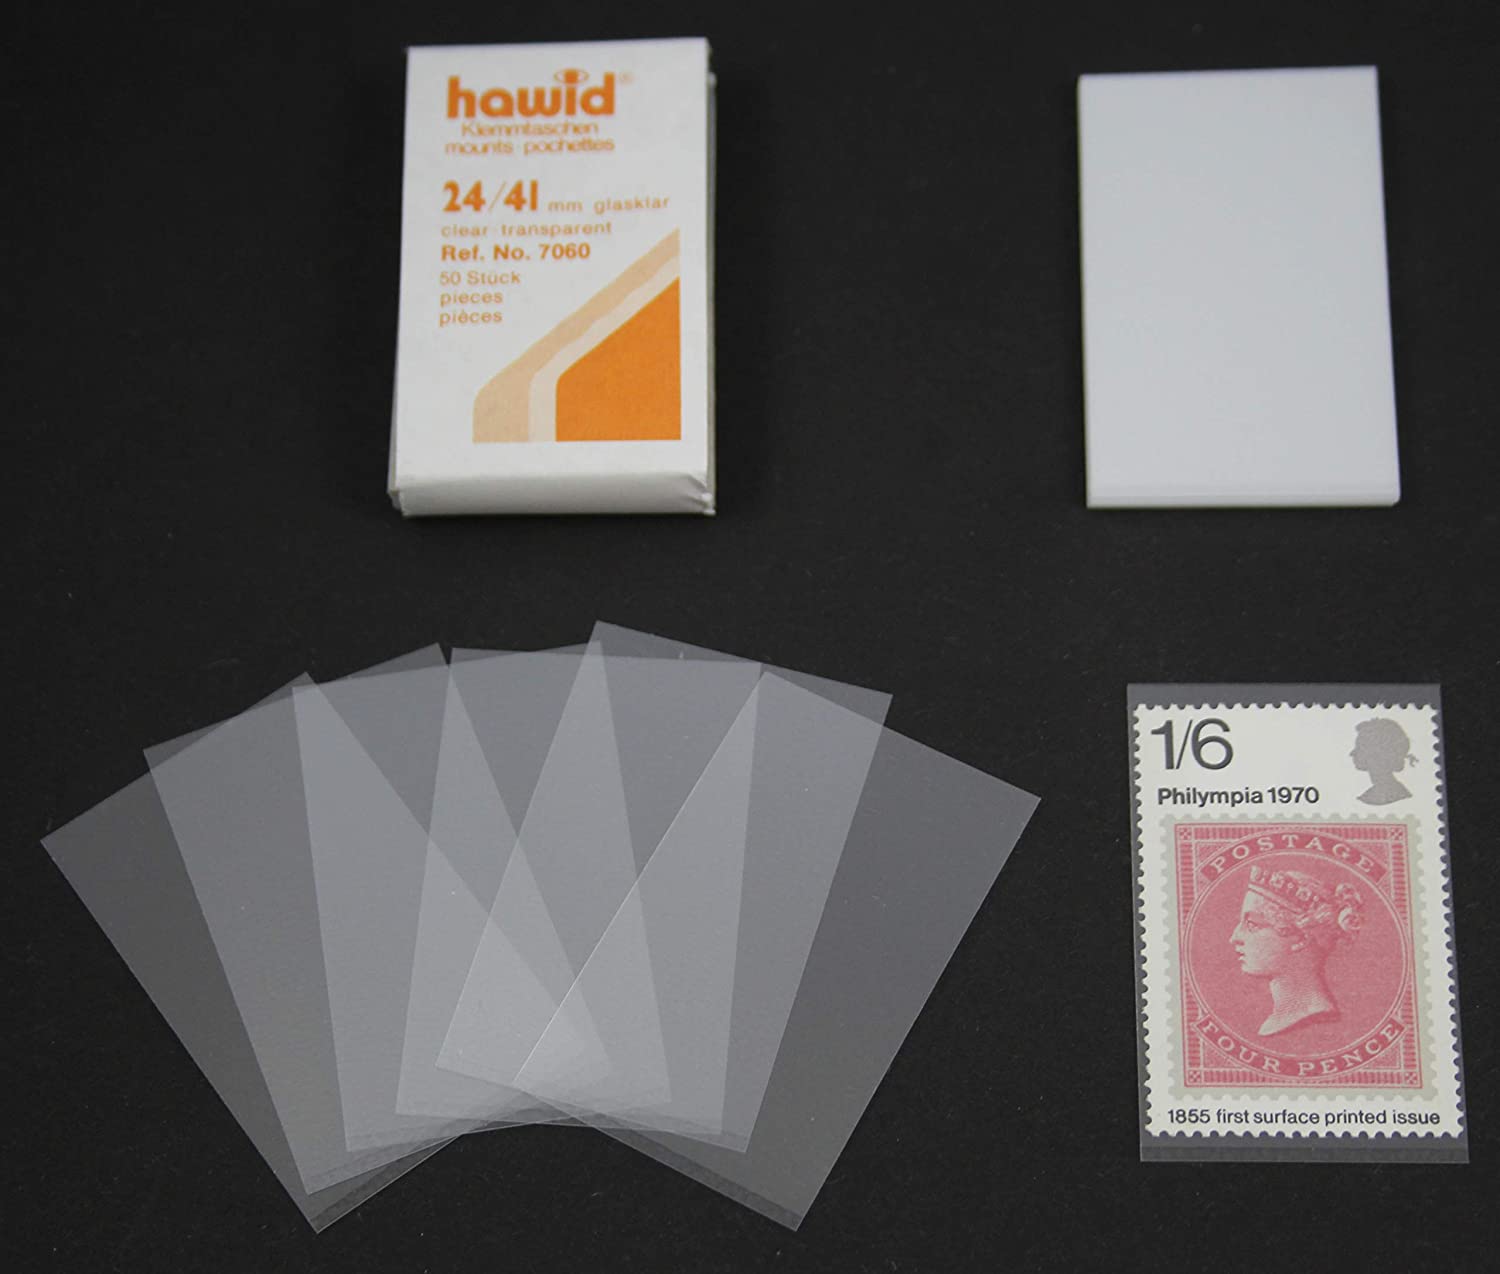 Hawid Stamp Mounts Starter Pack 7 Different Sizes